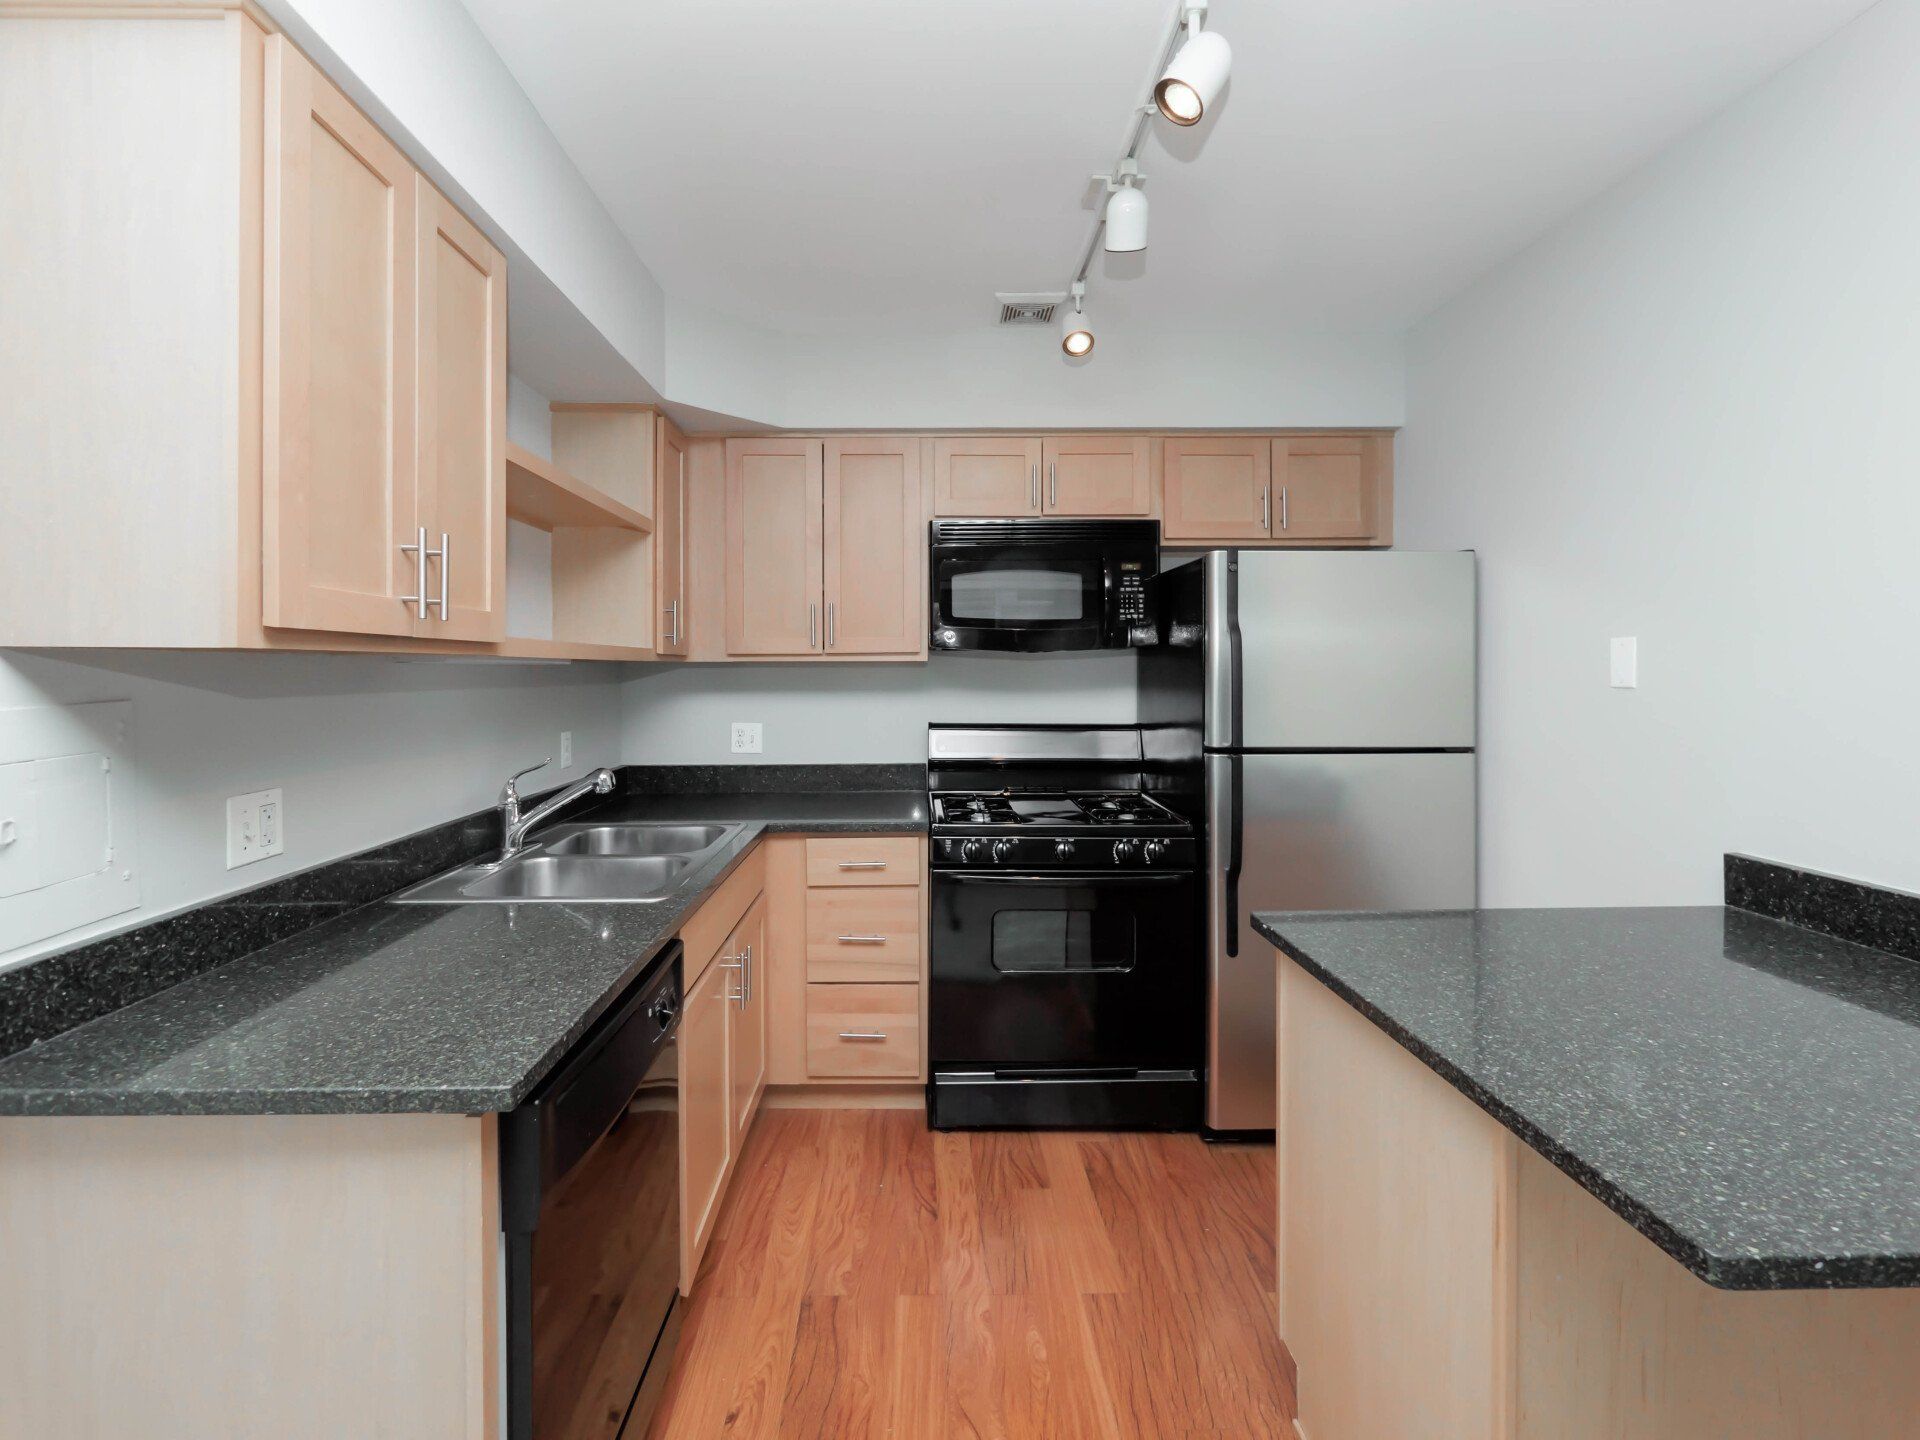 A kitchen with stainless steel appliances and granite countertops at Reside on Morse.